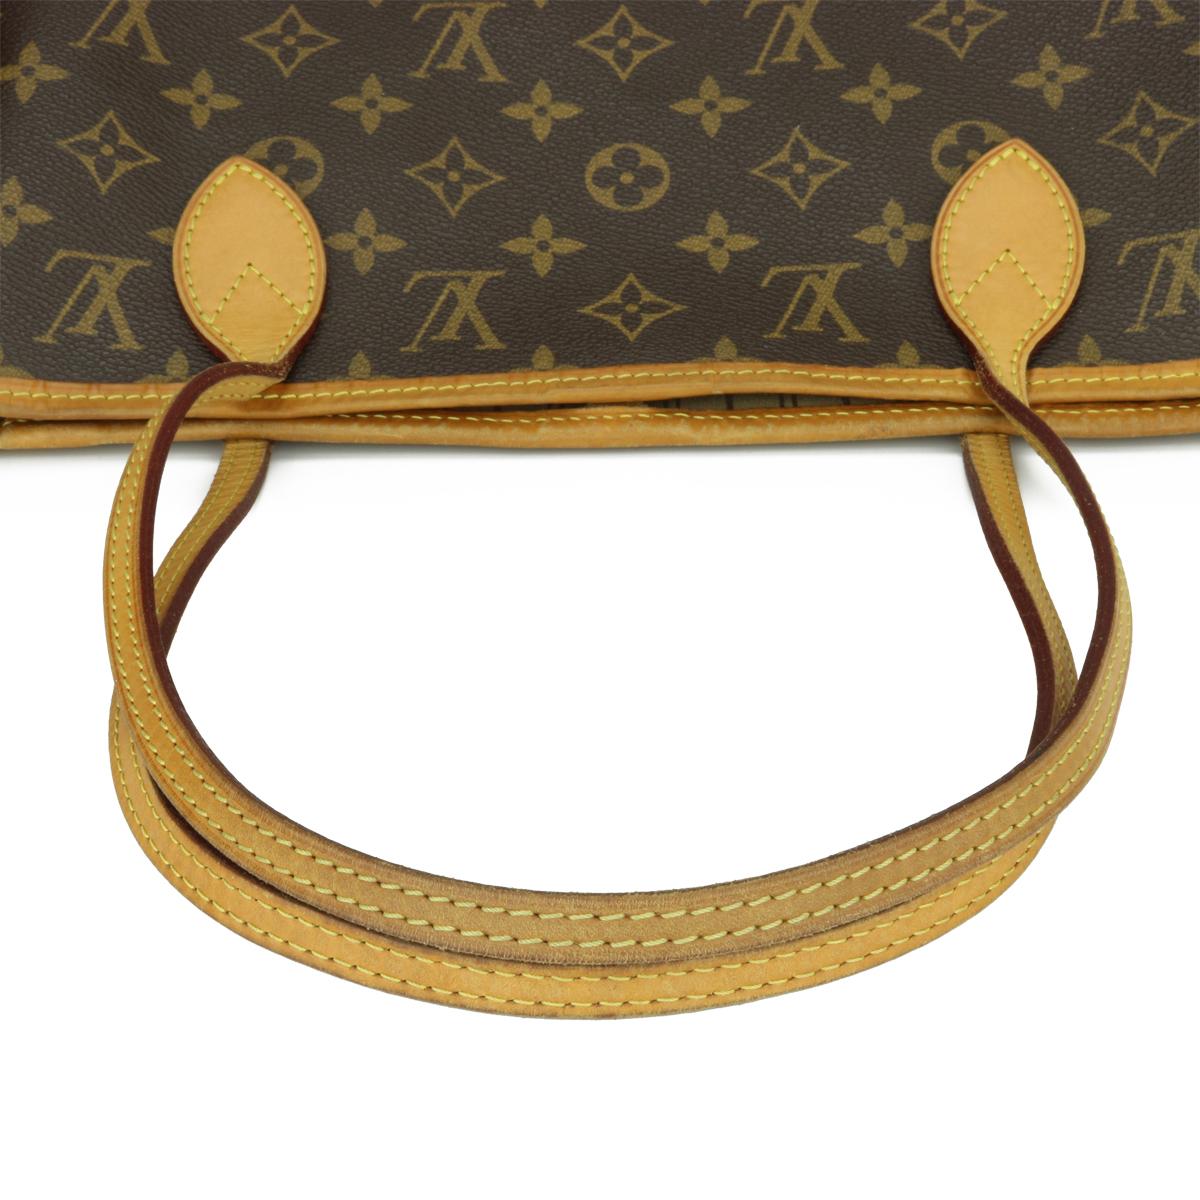 Louis Vuitton Neverfull MM Bag in Monogram with Beige Interior 2014 For Sale 5